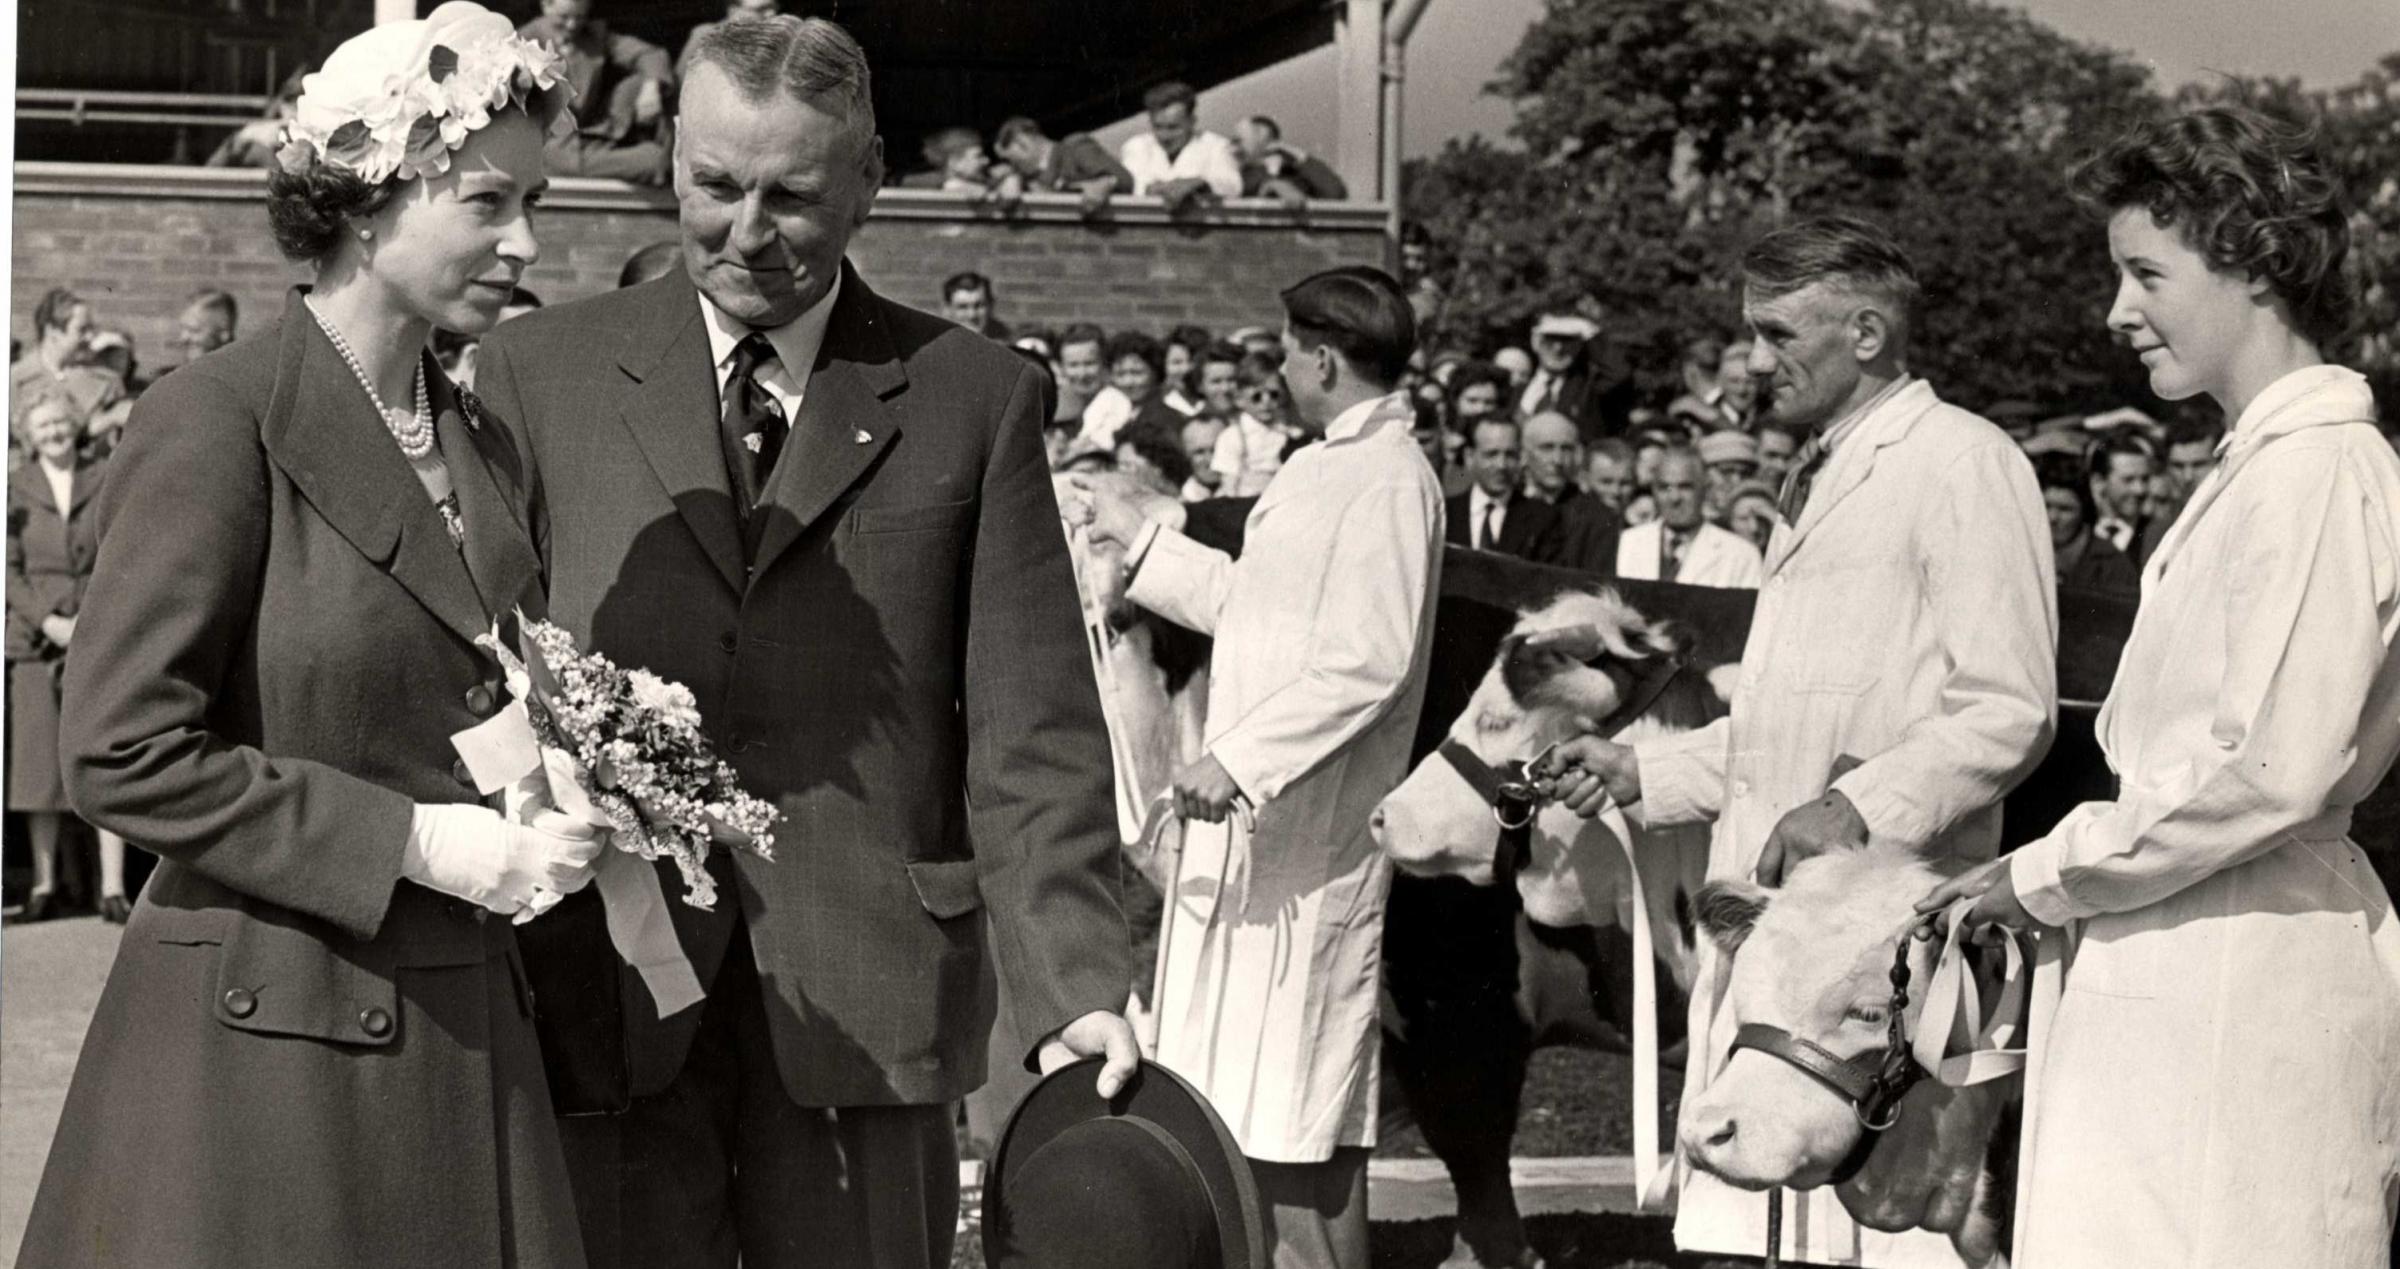 The Queen at Hereford Cattle Market in 1957